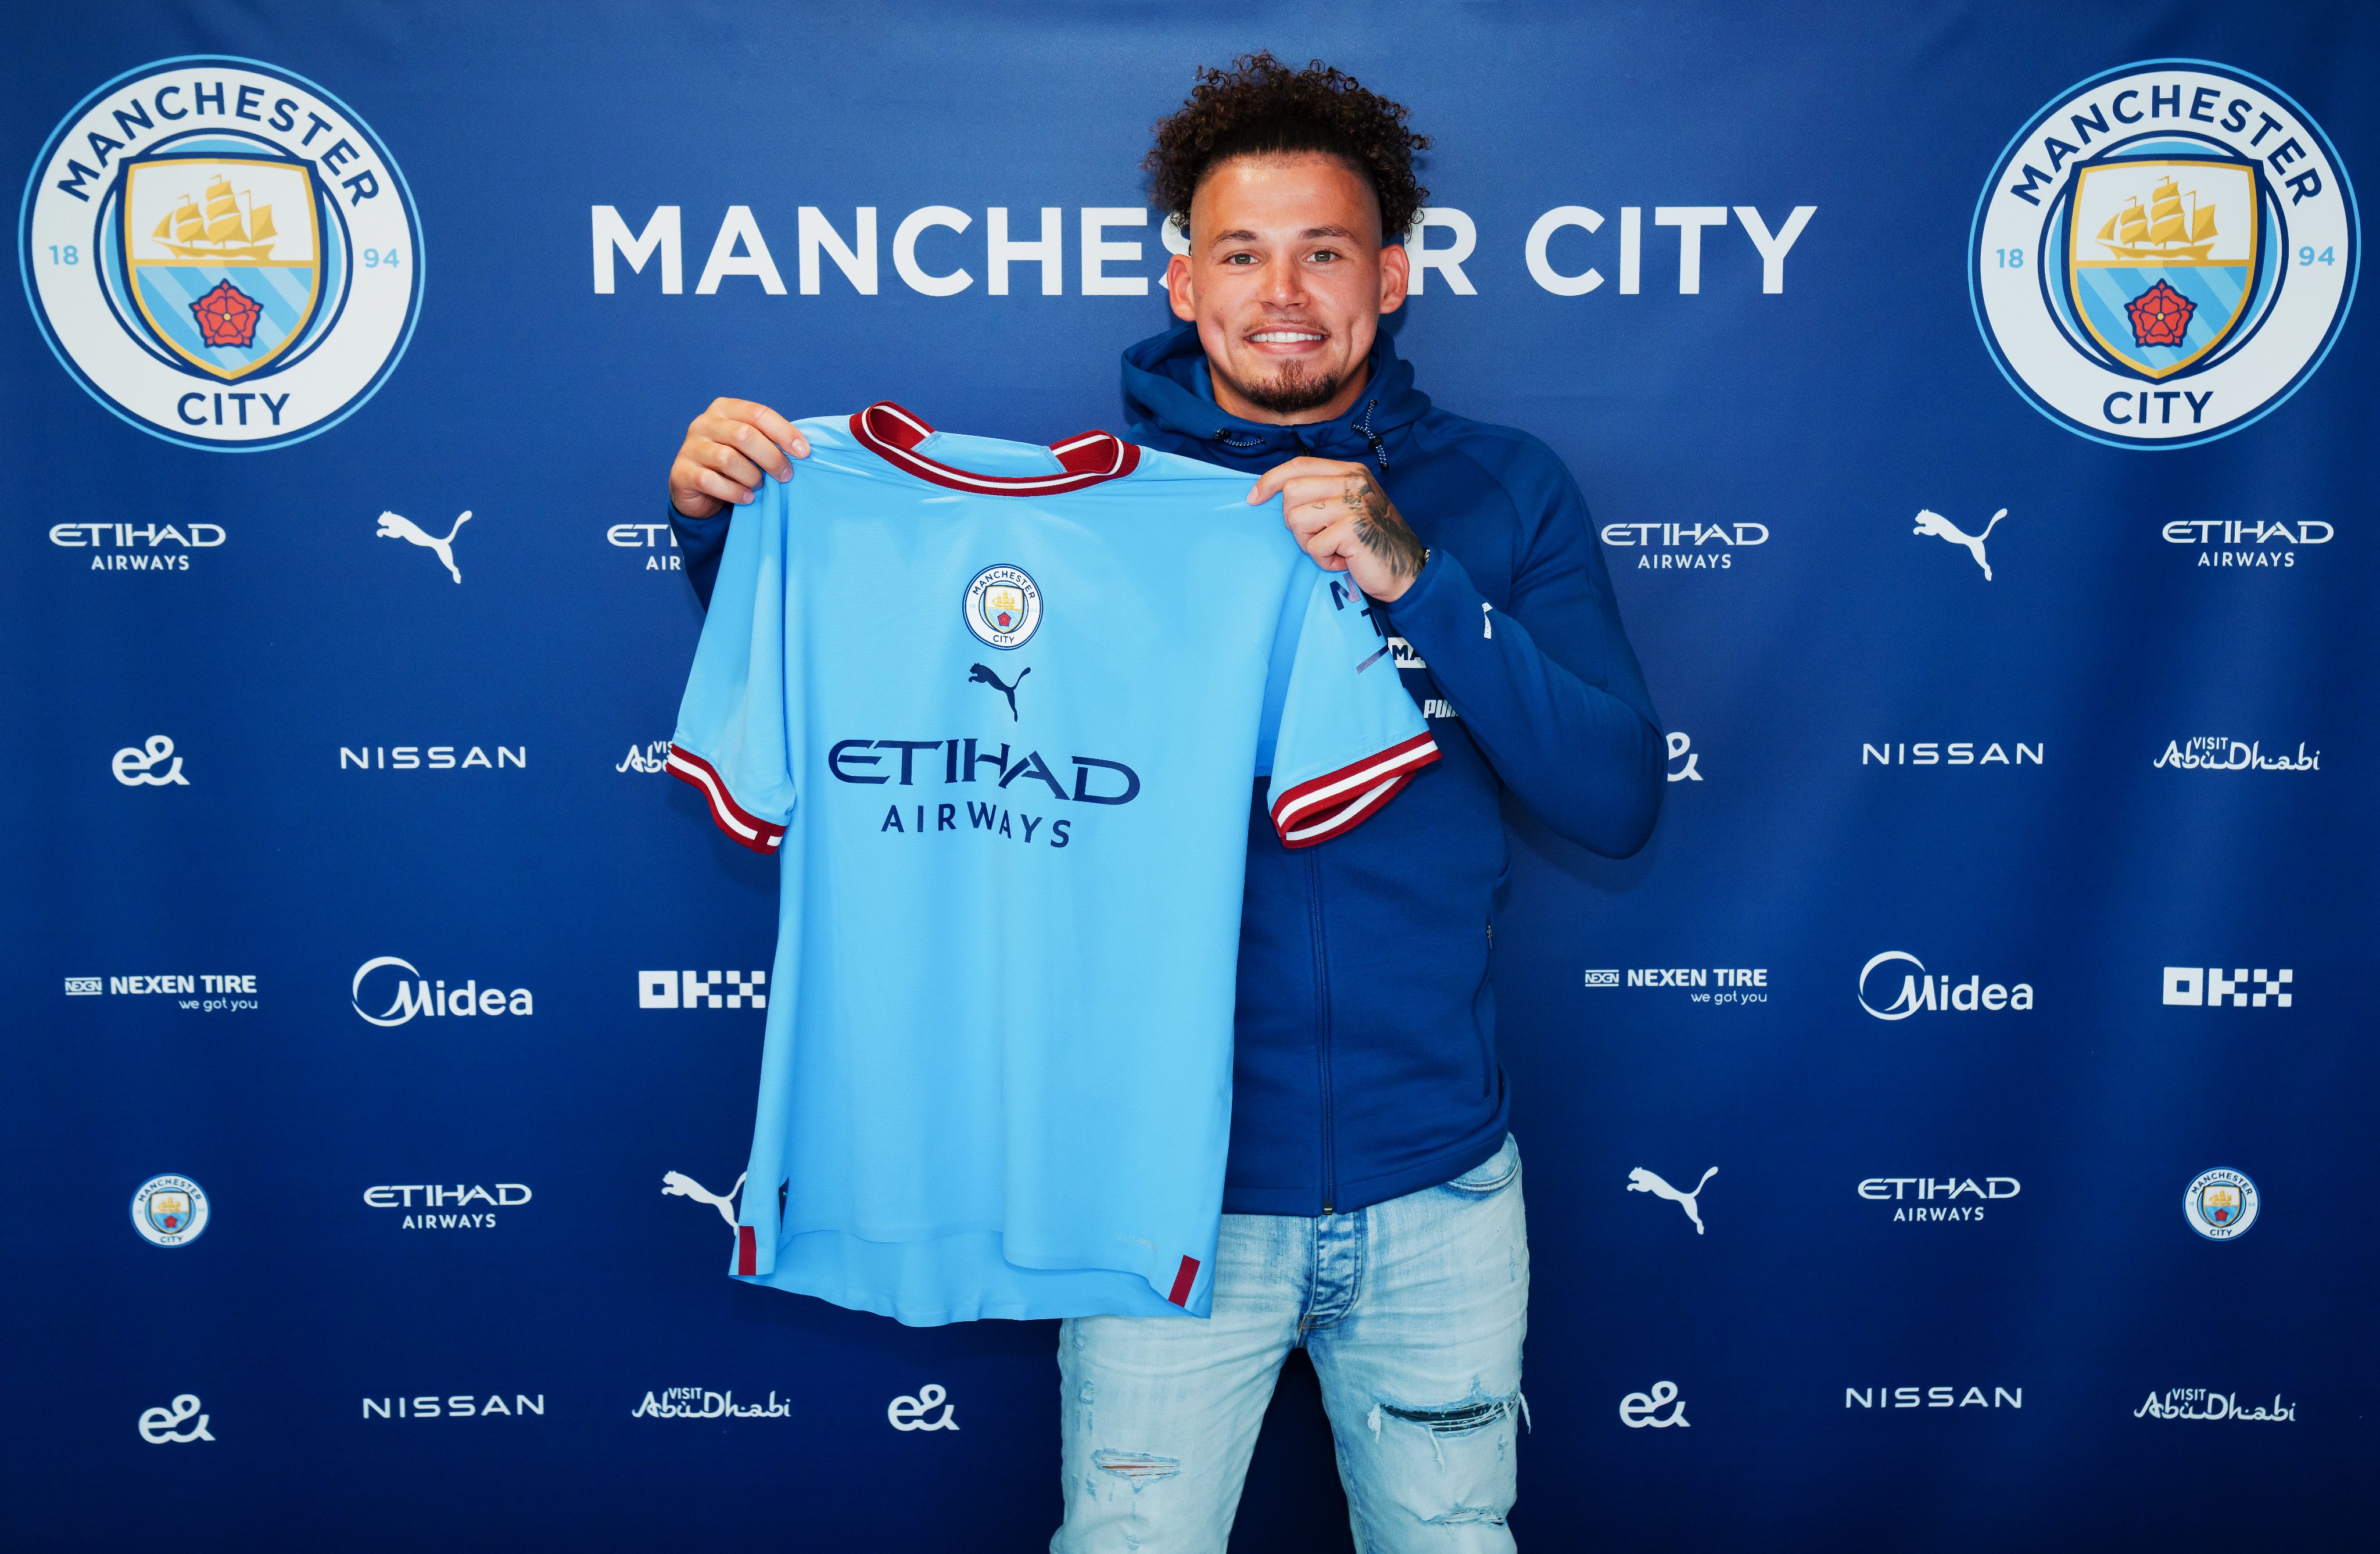 Manchester City confirms £42 million signing of Kalvin Phillips from Leeds